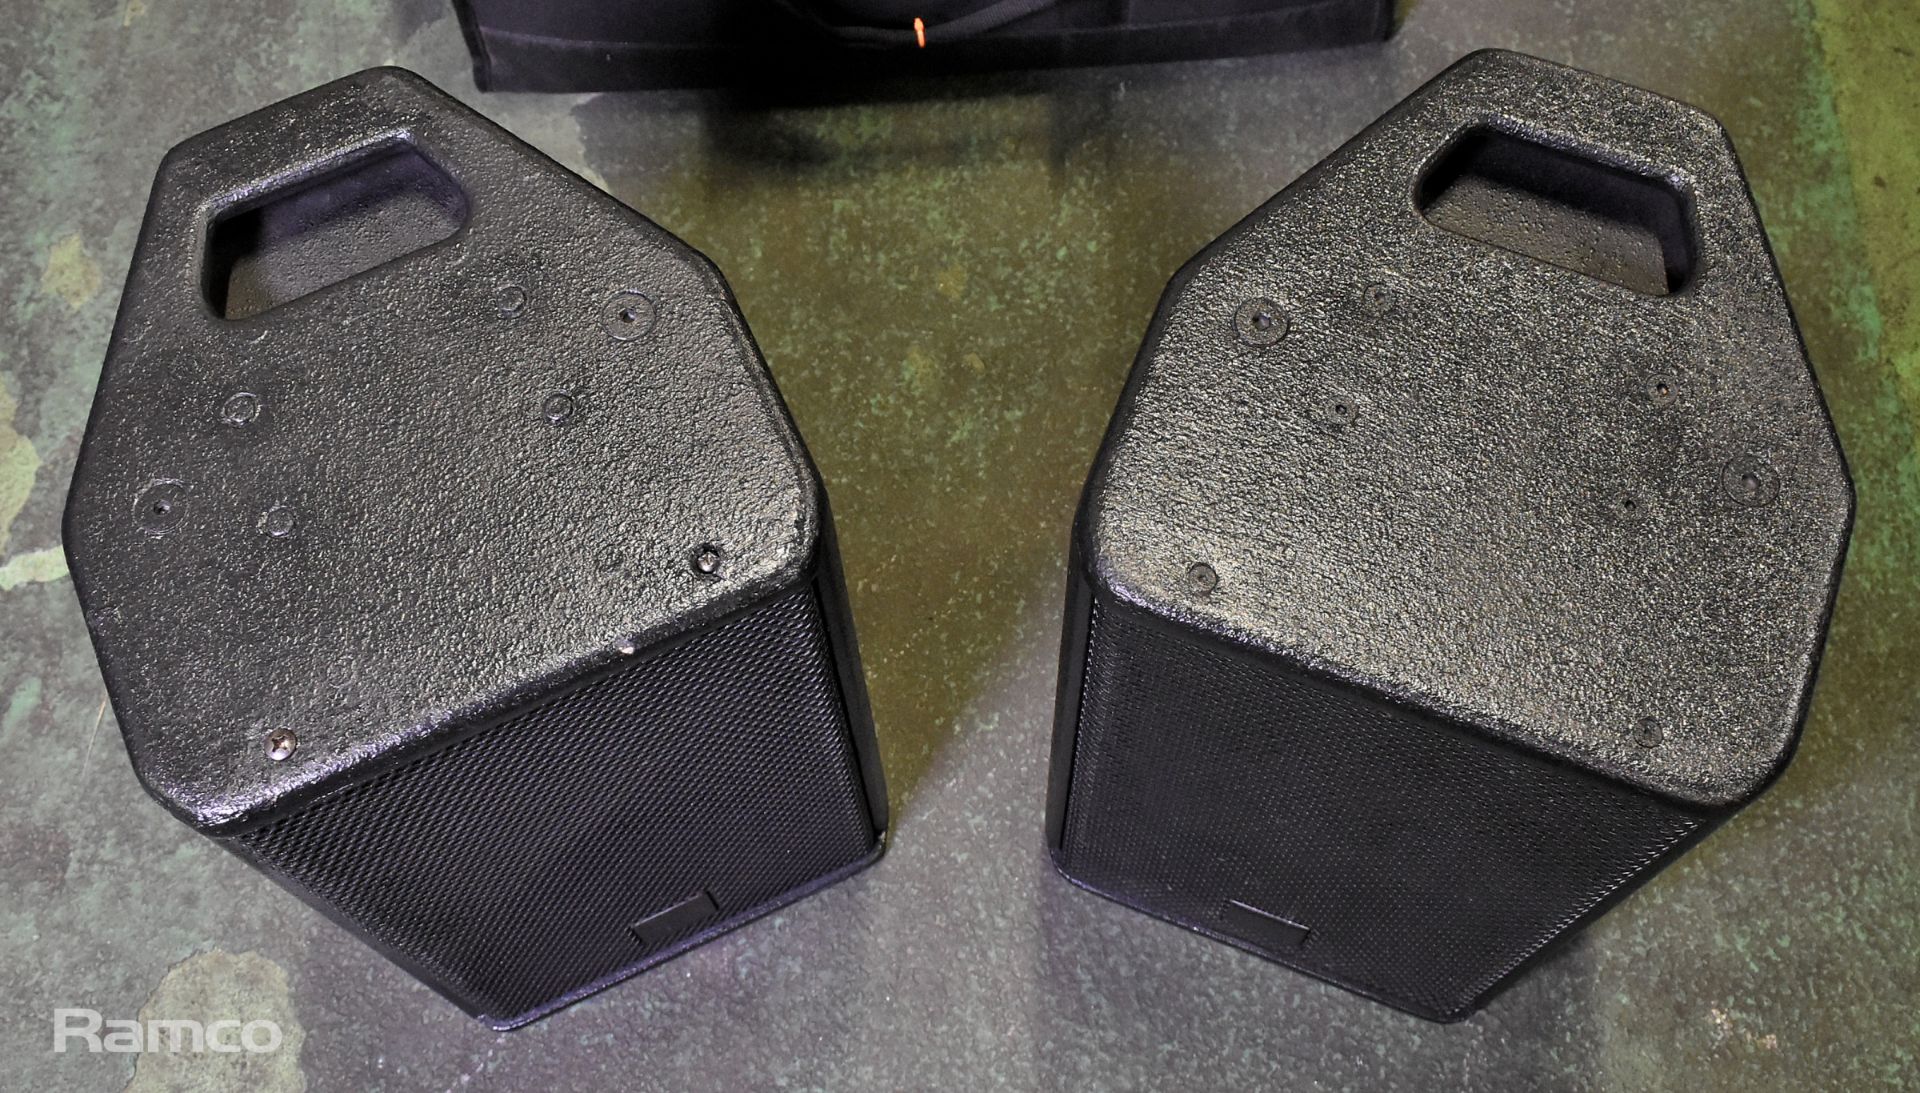 2x Logic LS8 loudspeakers - NL4 connection - recently painted with soft bag - Image 3 of 9